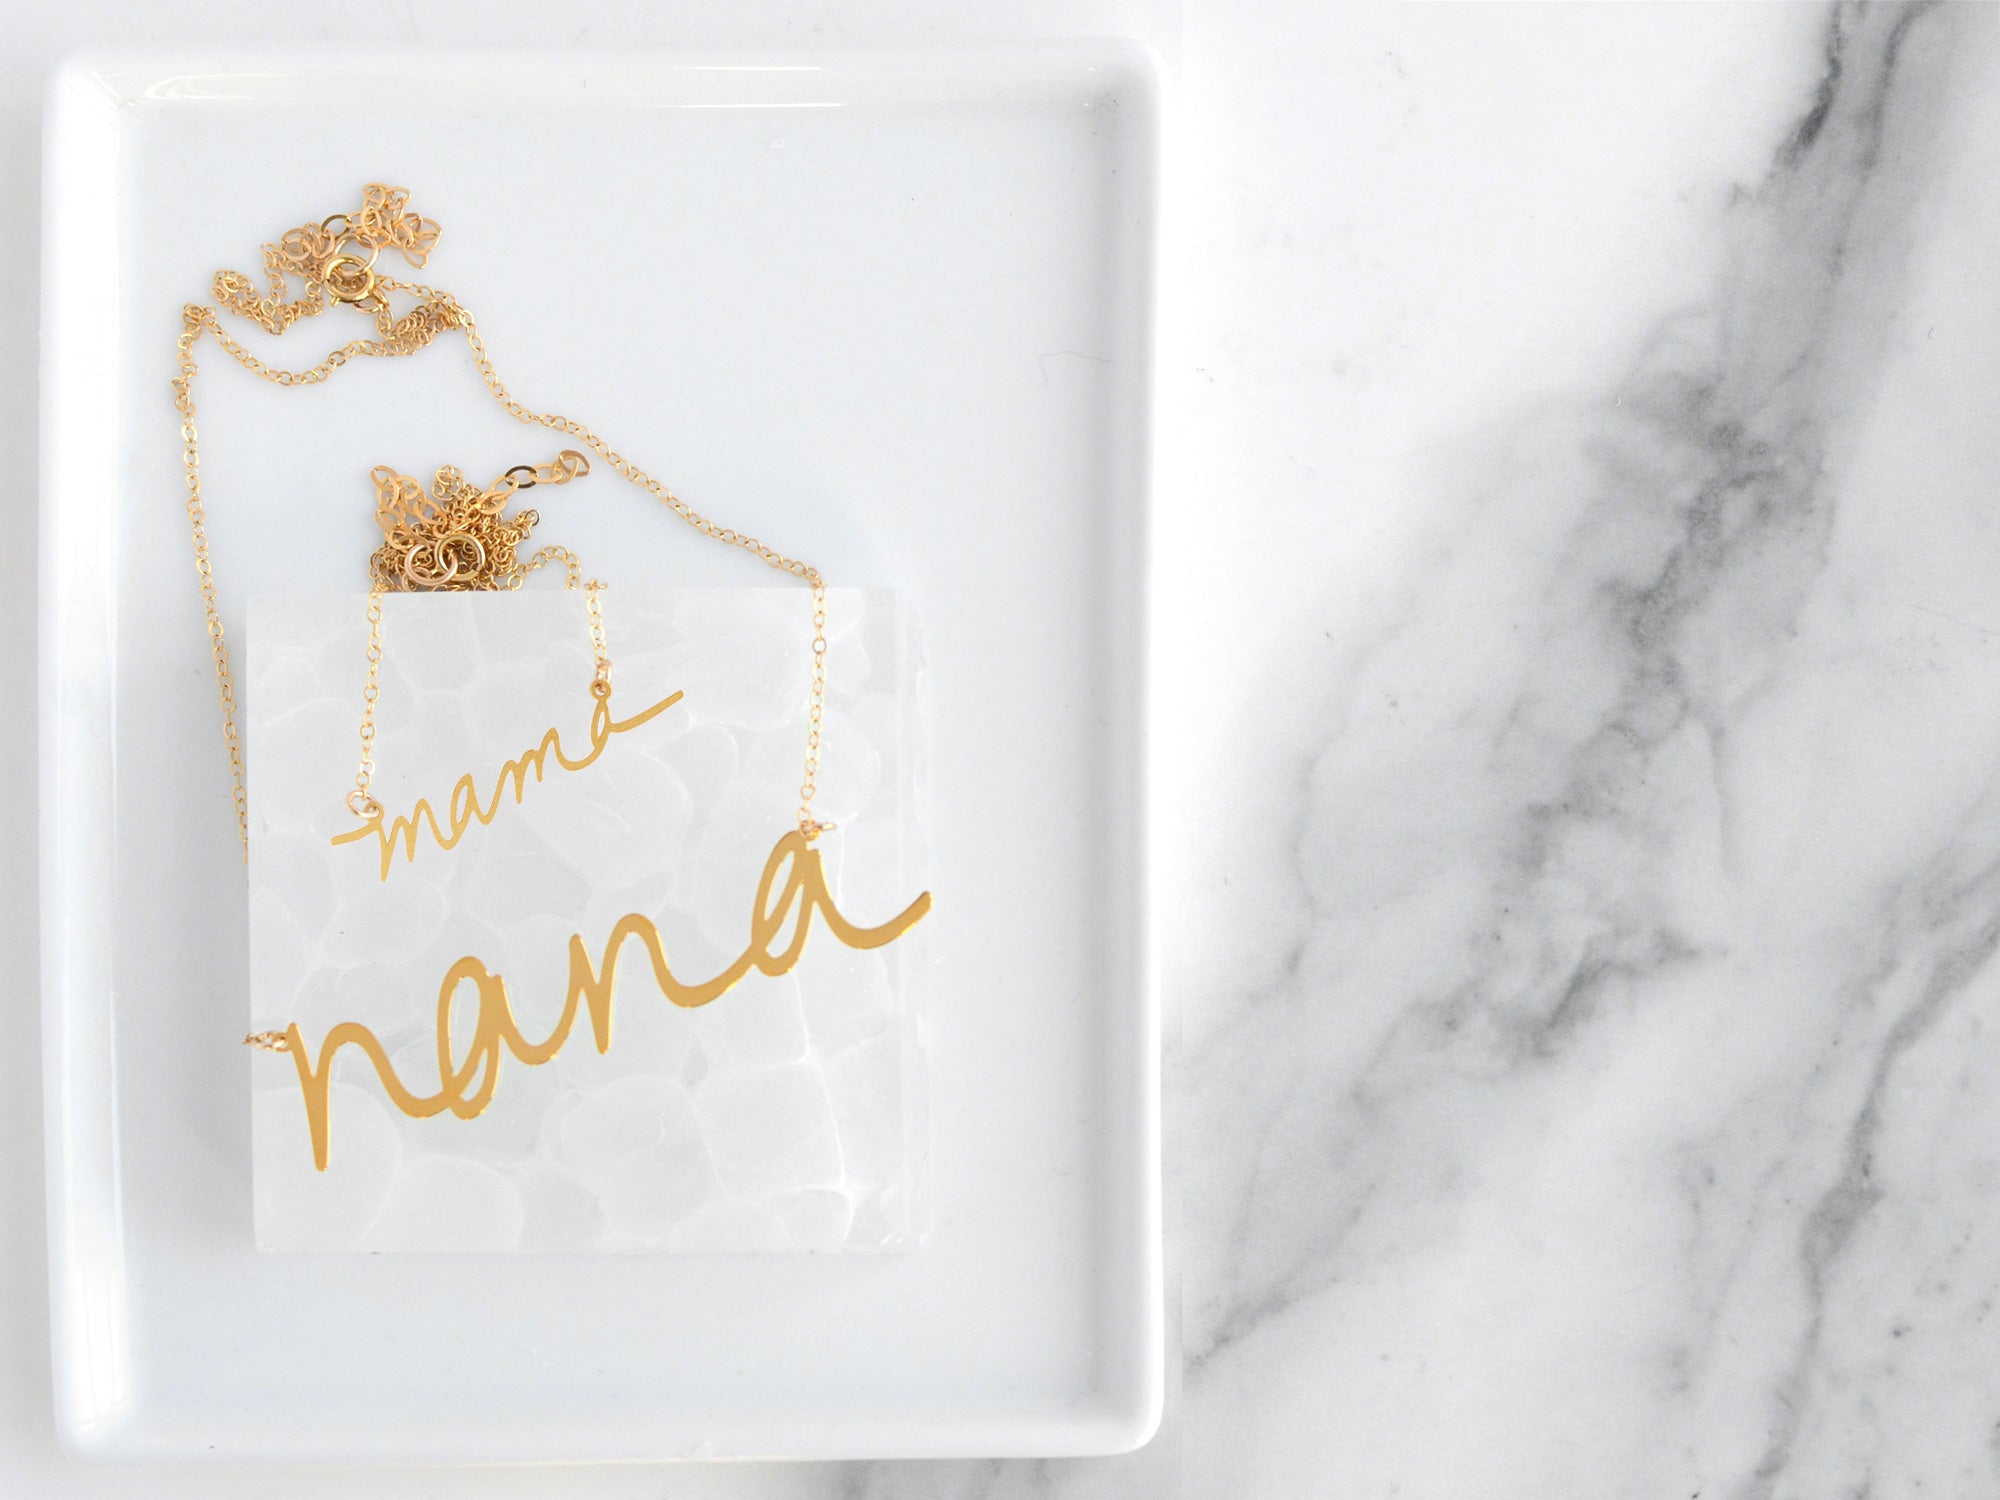 Mama and Nana Necklaces - High Quality, Affordable, Hand Written, Self Love Word Necklaces - Available in Gold and Silver - Small and Large Sizes - Made in USA - Brevity Jewelry